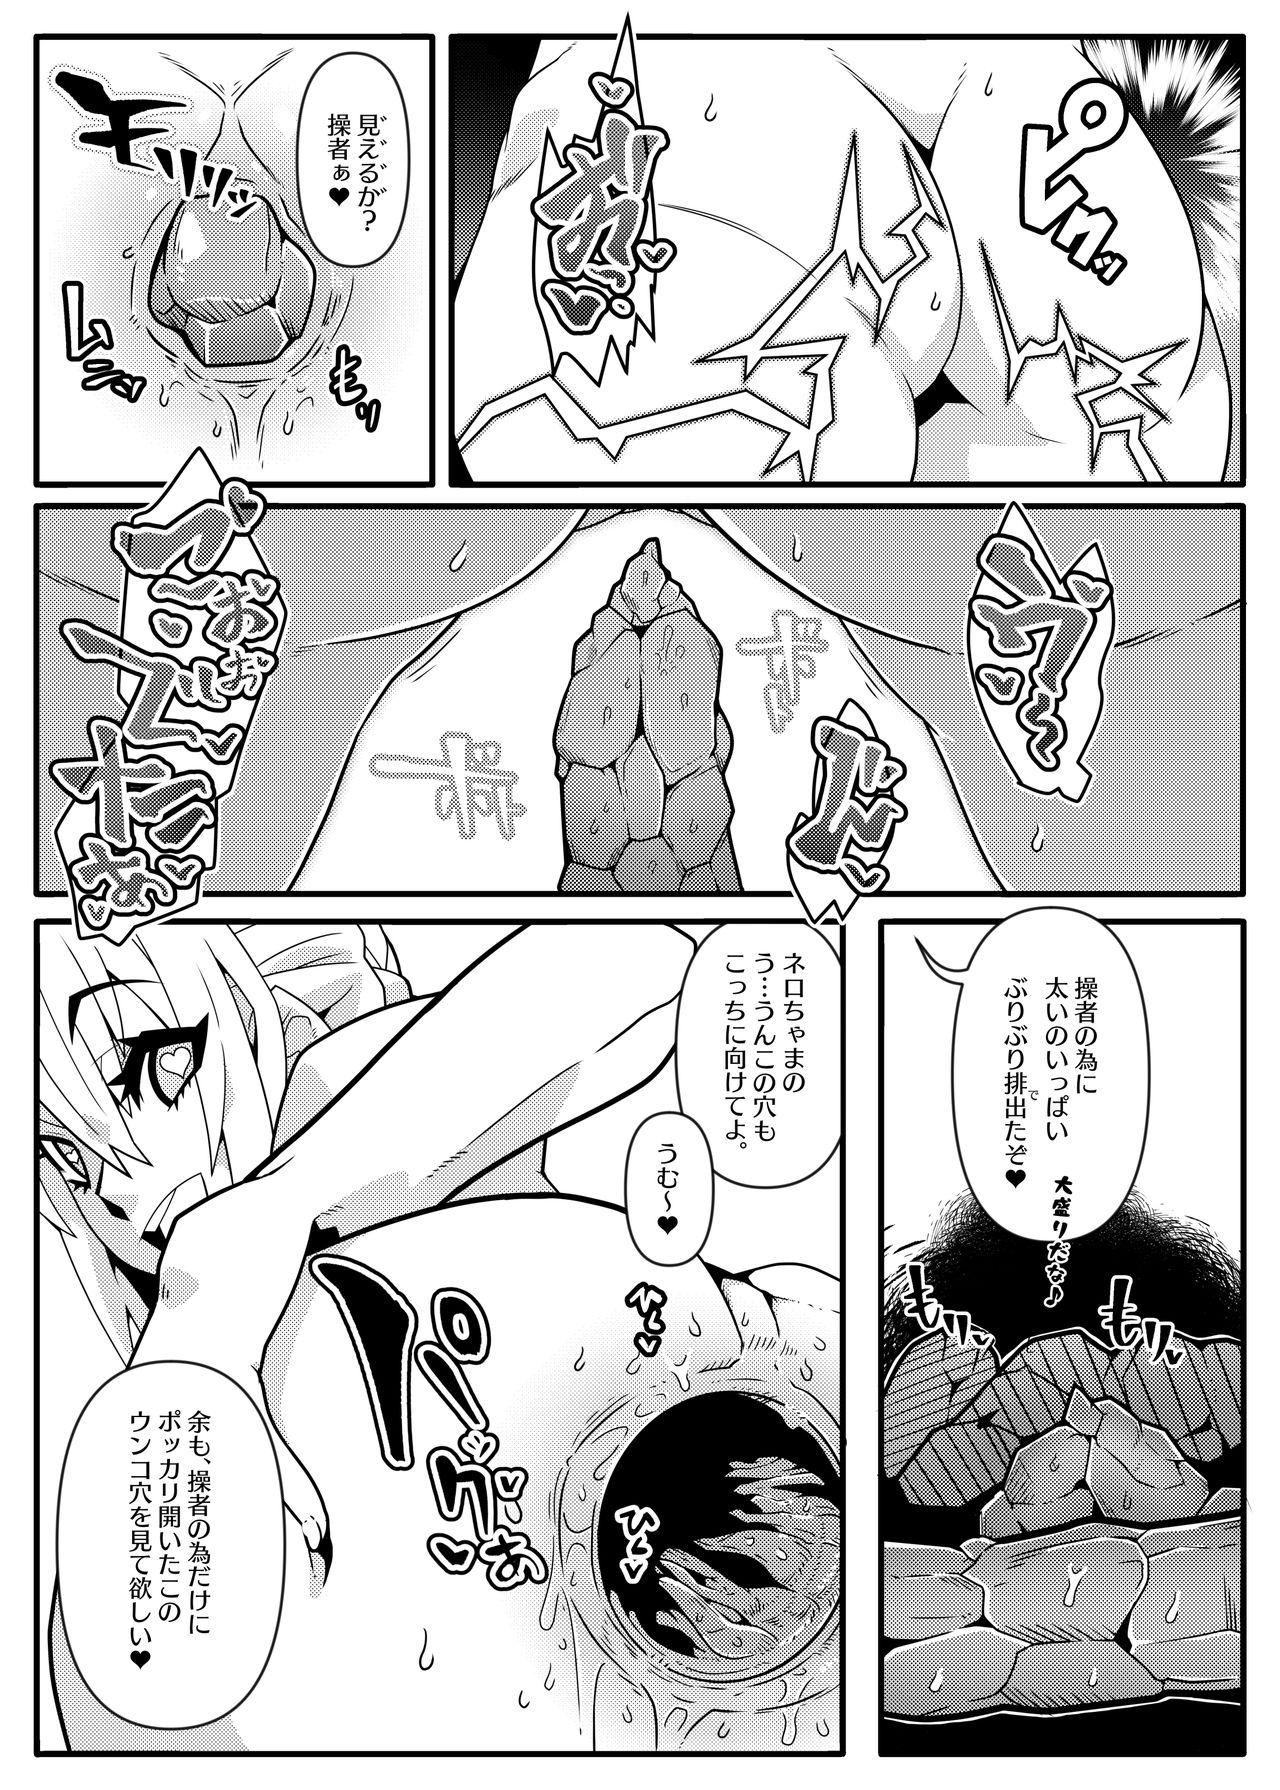 Girlfriends MIND CONTROL GIRL 14 - Fate grand order Brunet - Page 9